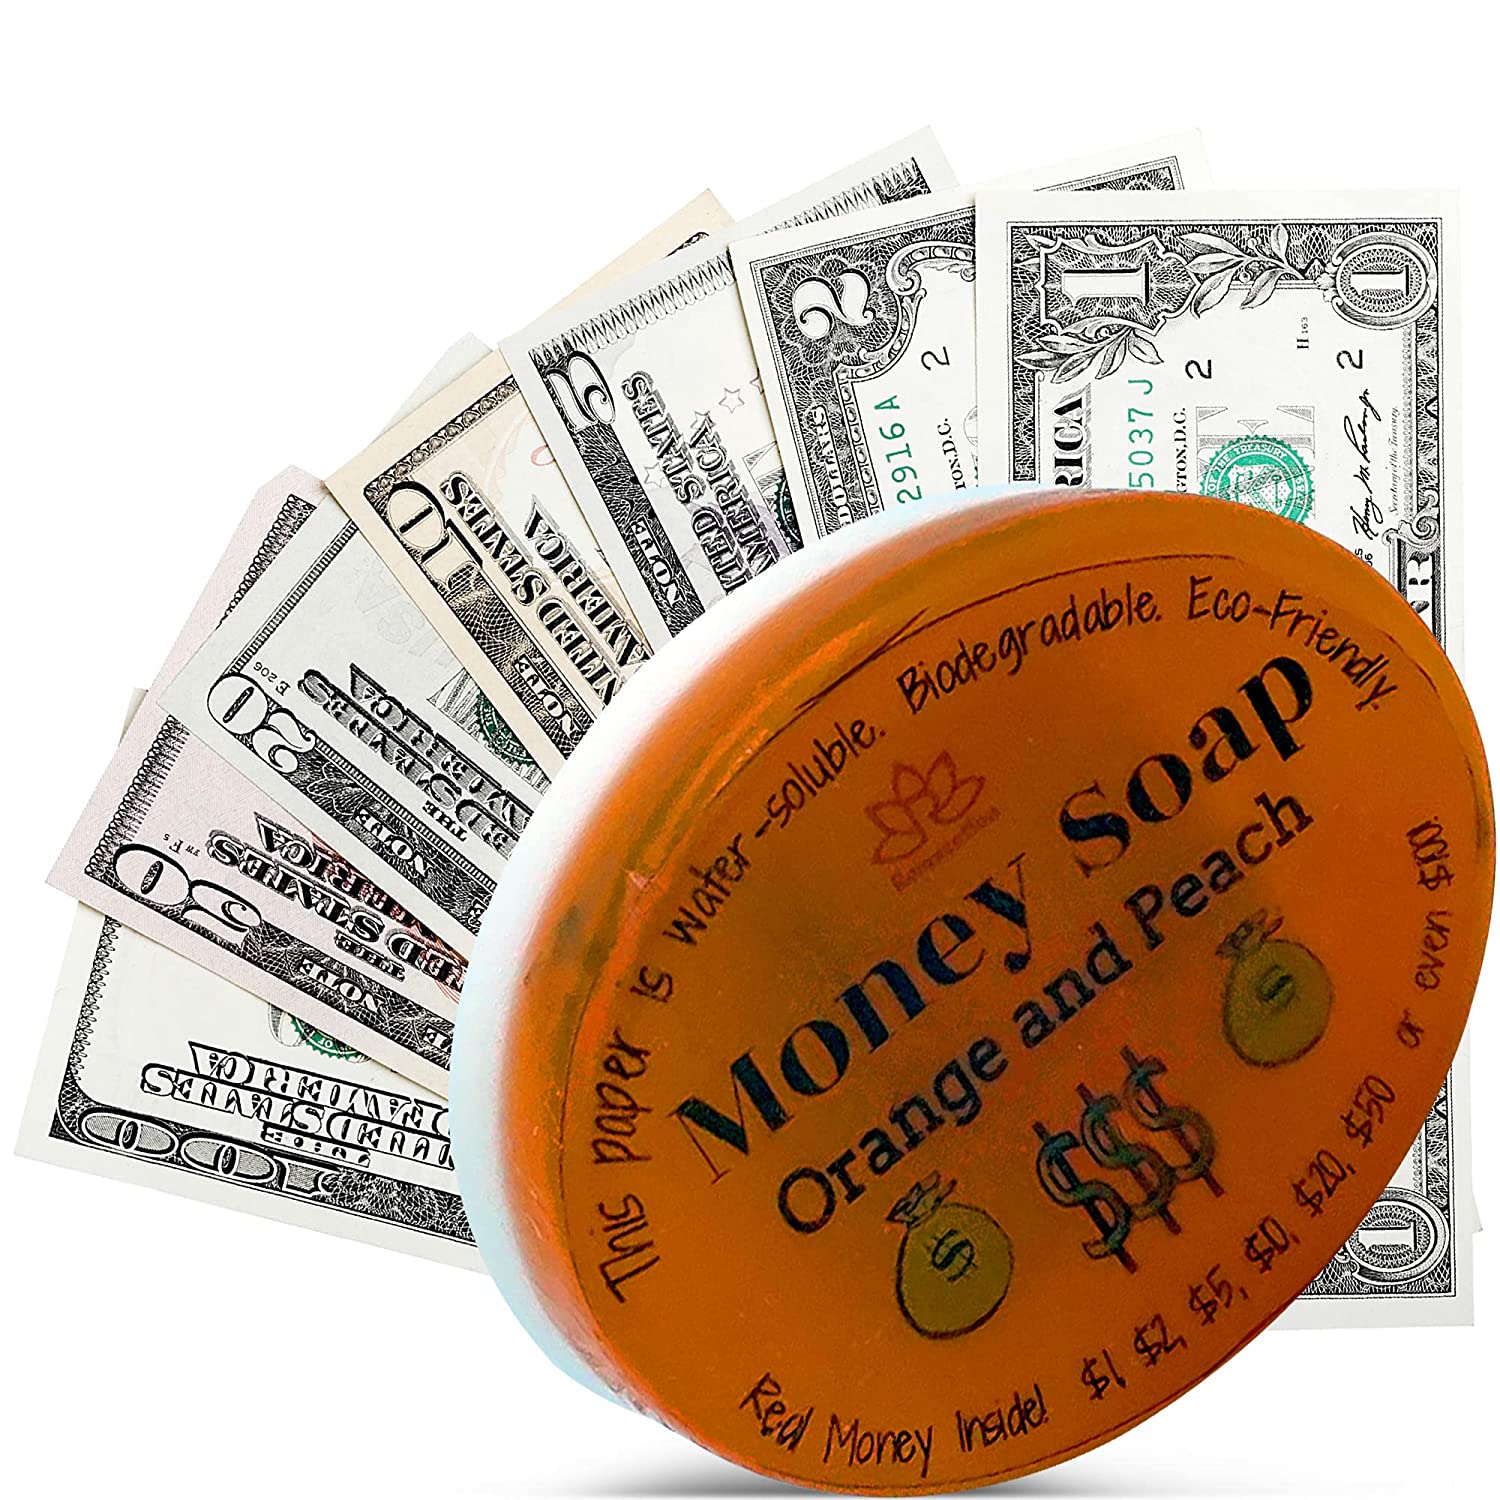 1 Money Soap Bar with Real Cash Inside Up to $100 Bill Inside in Each Bar